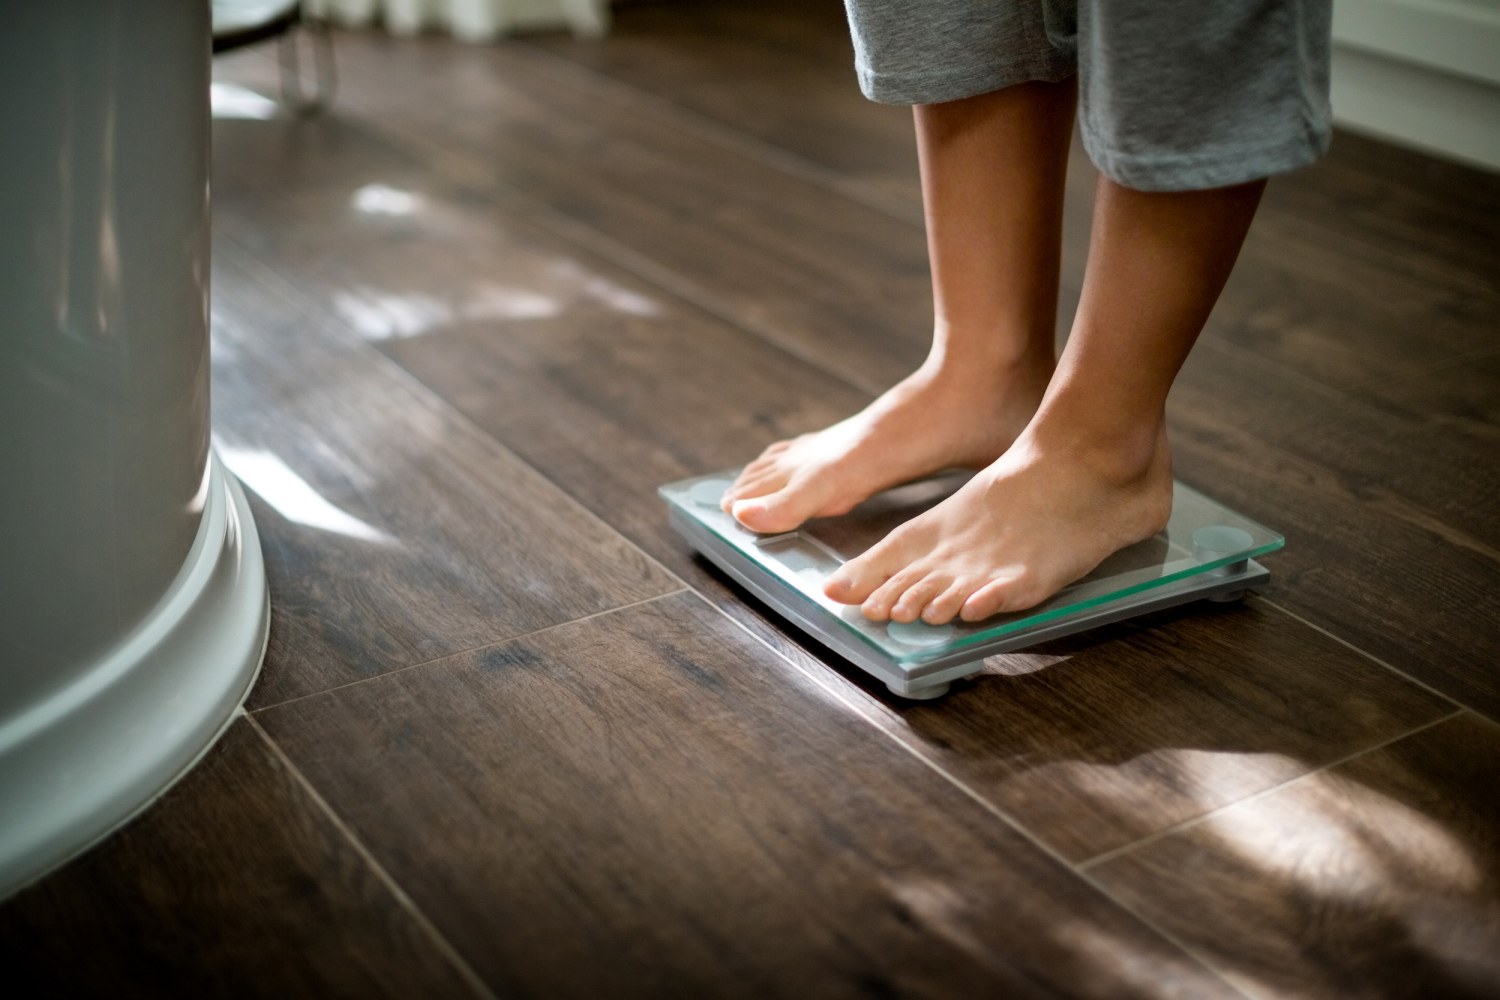 A key weight loss tool: Your Digital bathroom scale